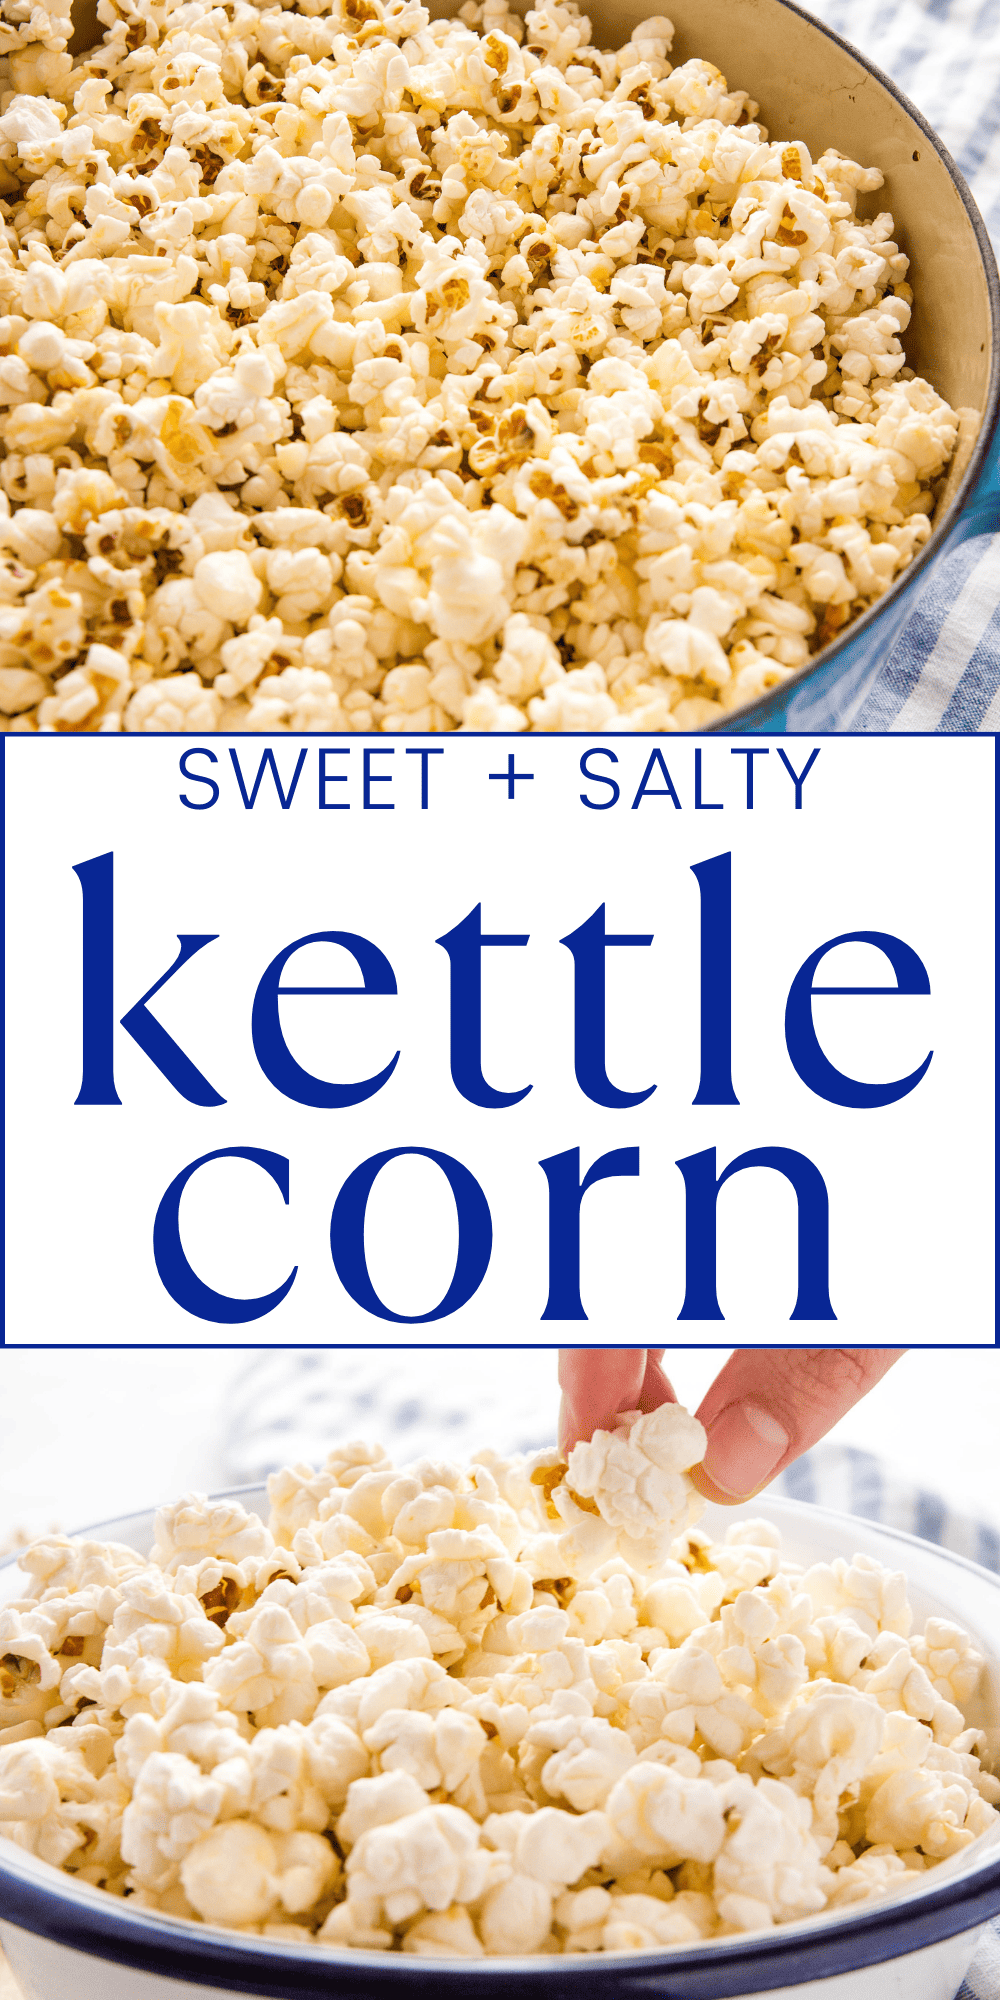 This Kettle Corn recipe has delicious sweet and salty flavour. This 4-ingredient homemade kettle corn popcorn is a quick and easy snack the whole family will love. It's simple to make in 15 minutes or less! Recipe from thebusybaker.ca! #kettlecorn #popcorn #snack #kettlecornpopcorn #kettlecornrecipe #homemadekettlecorn via @busybakerblog